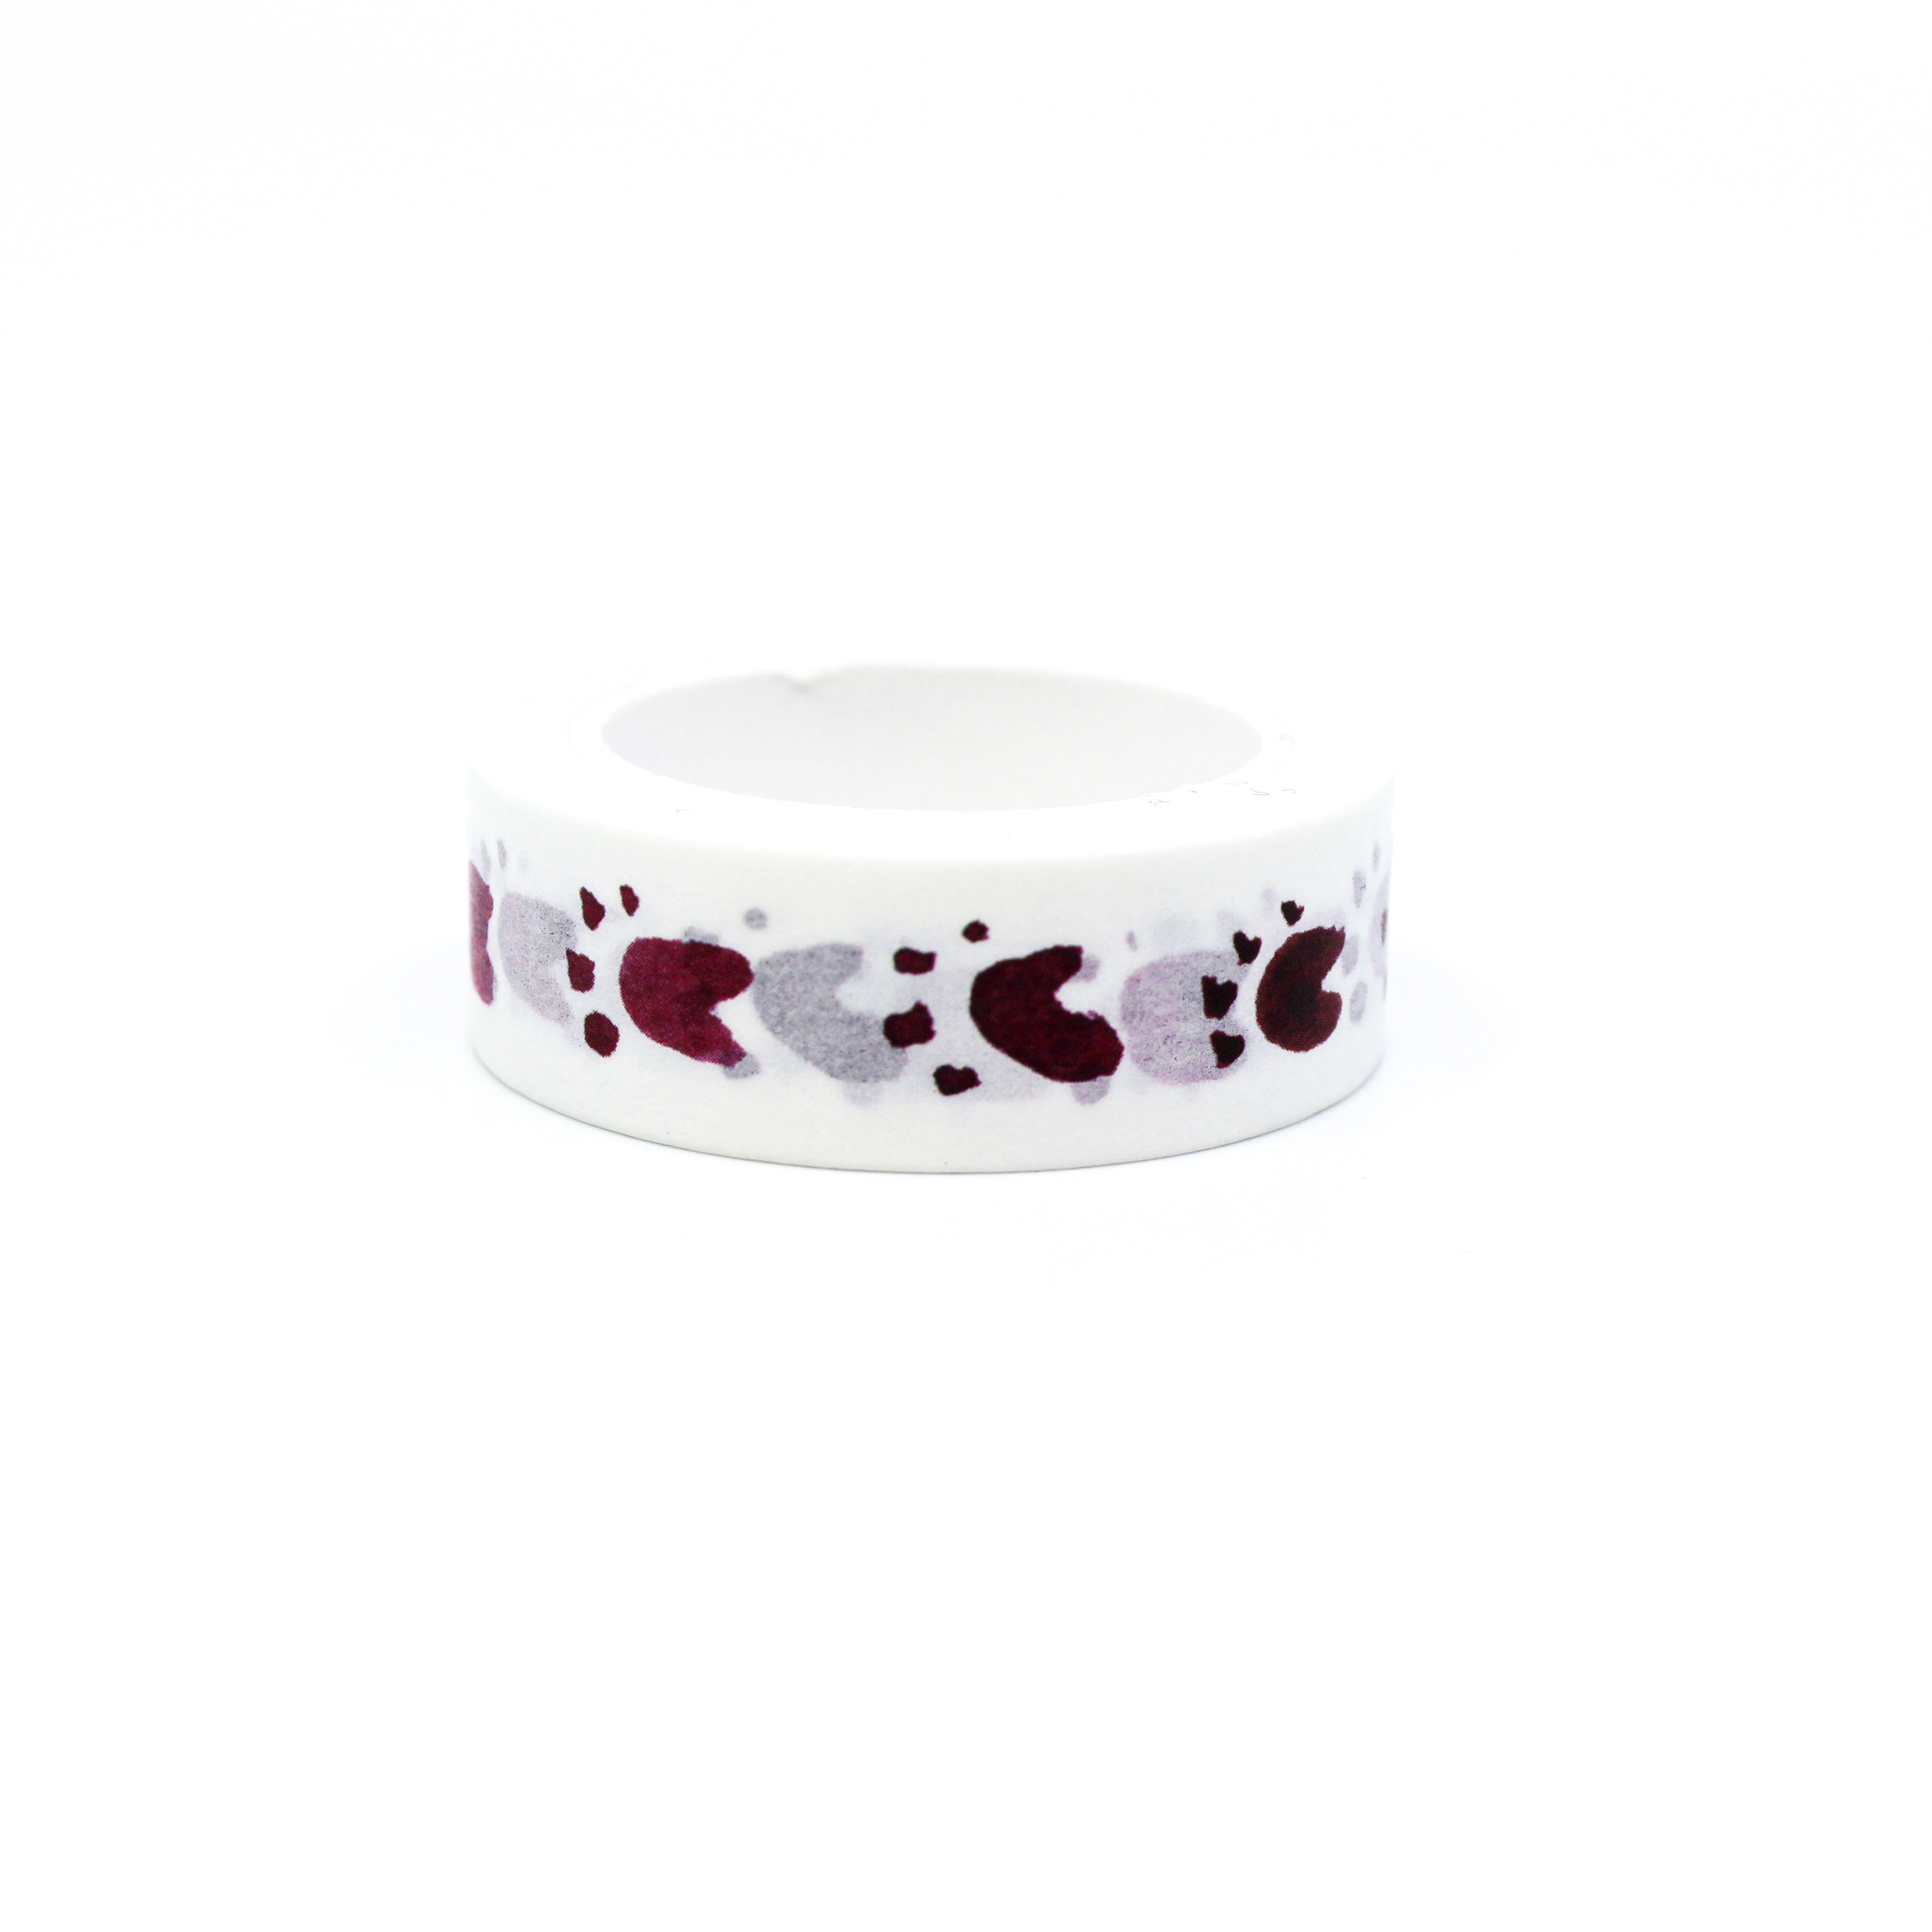 This is cute paw prints of animal, dog, or bear washi tape from BBB Supplies Craft Shop